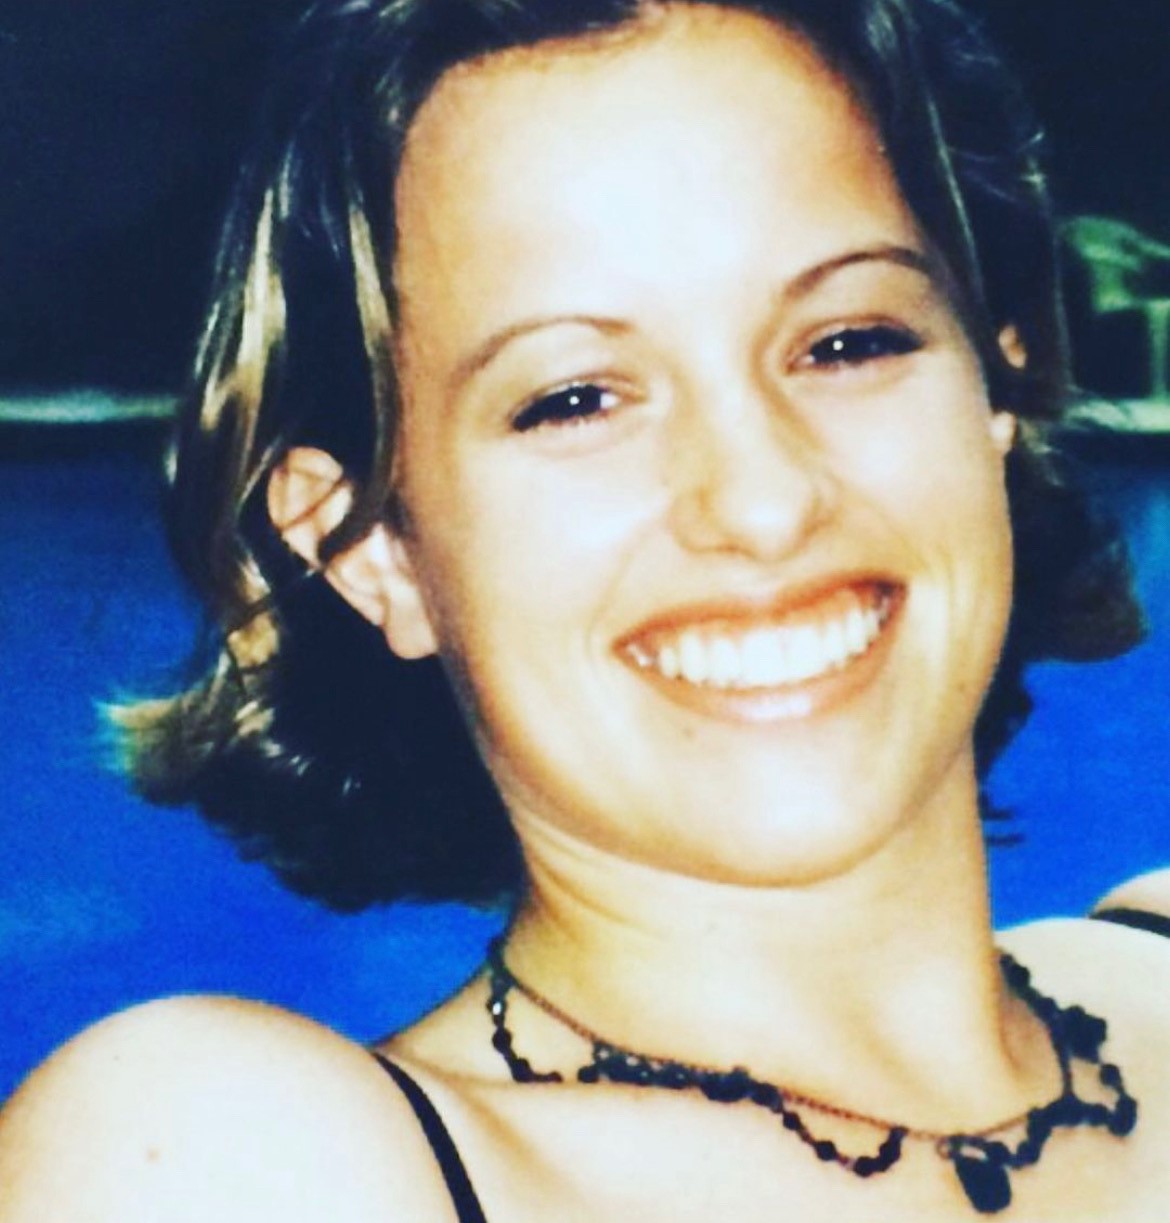 Jessica Walker, who tragically lost her life in 2003.